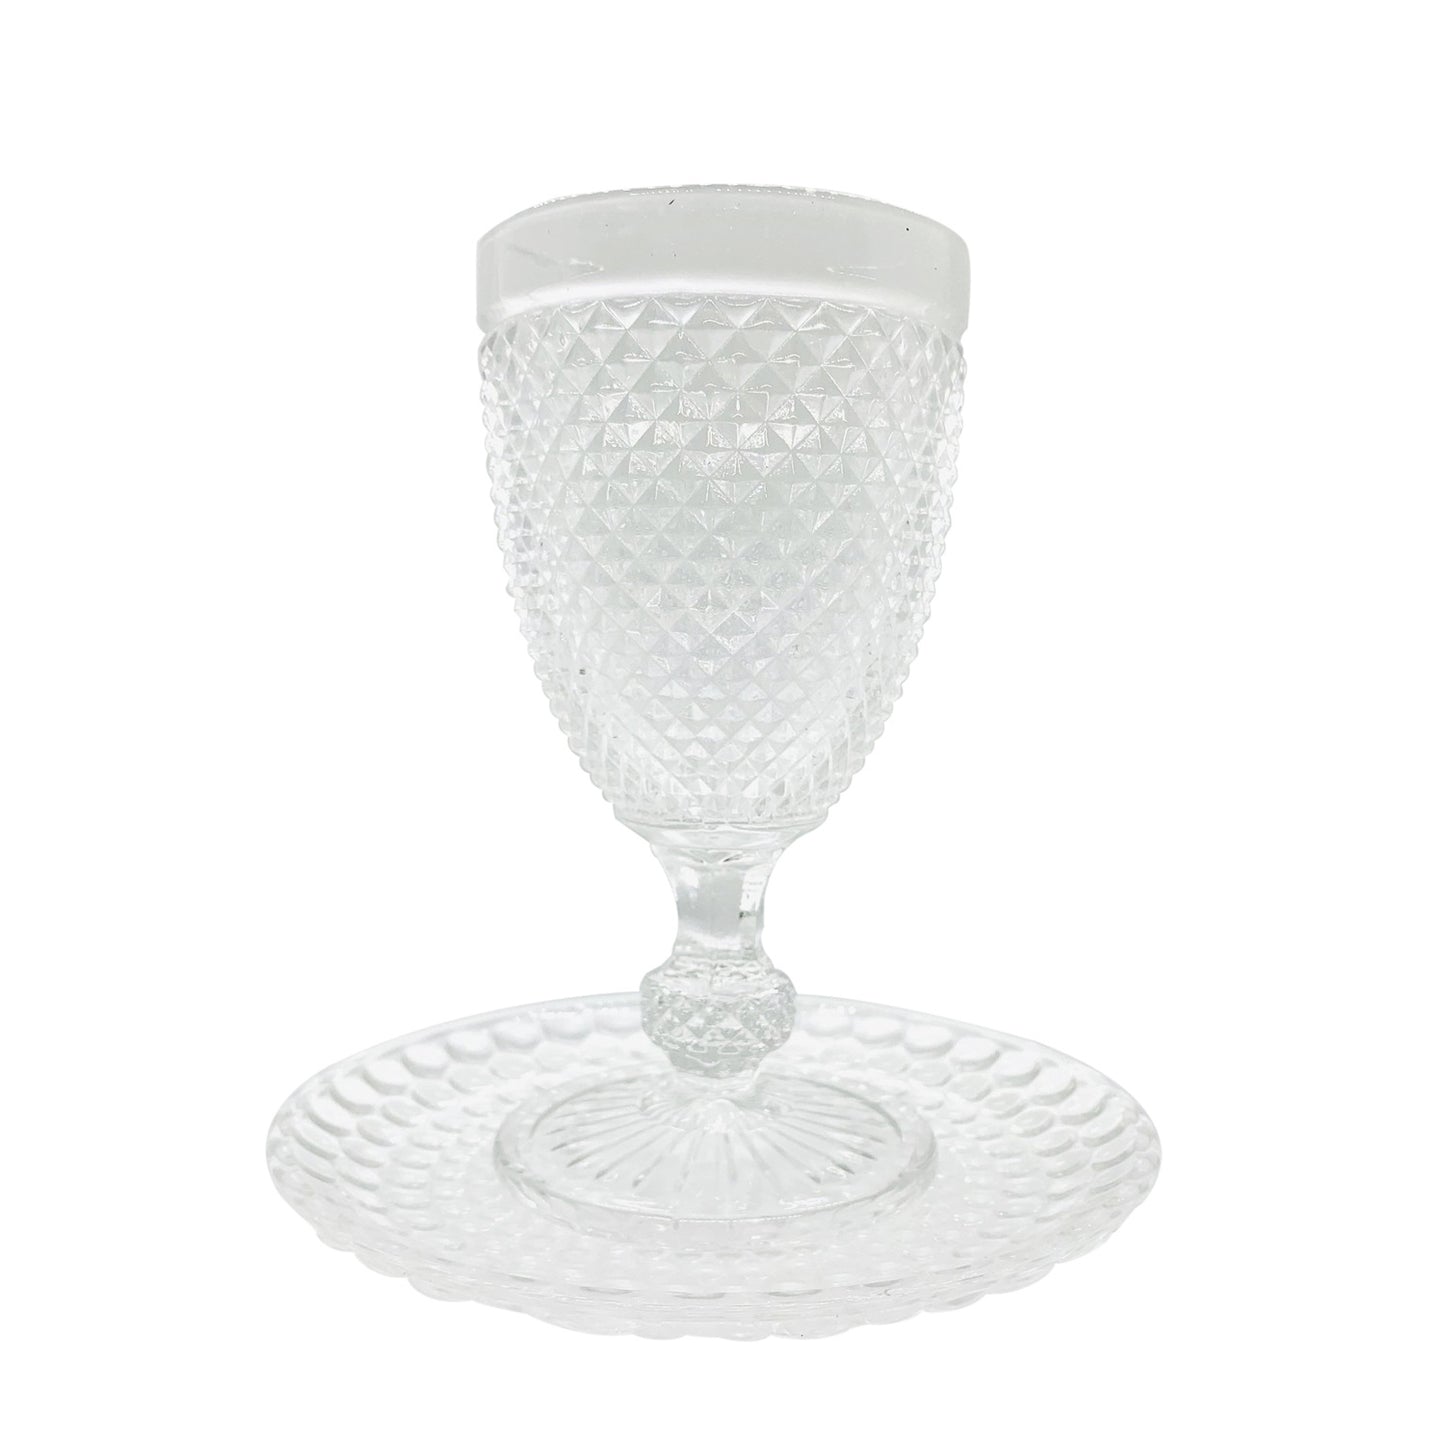 Fancy Elegant Decorated Kiddush Glass with a Plate.